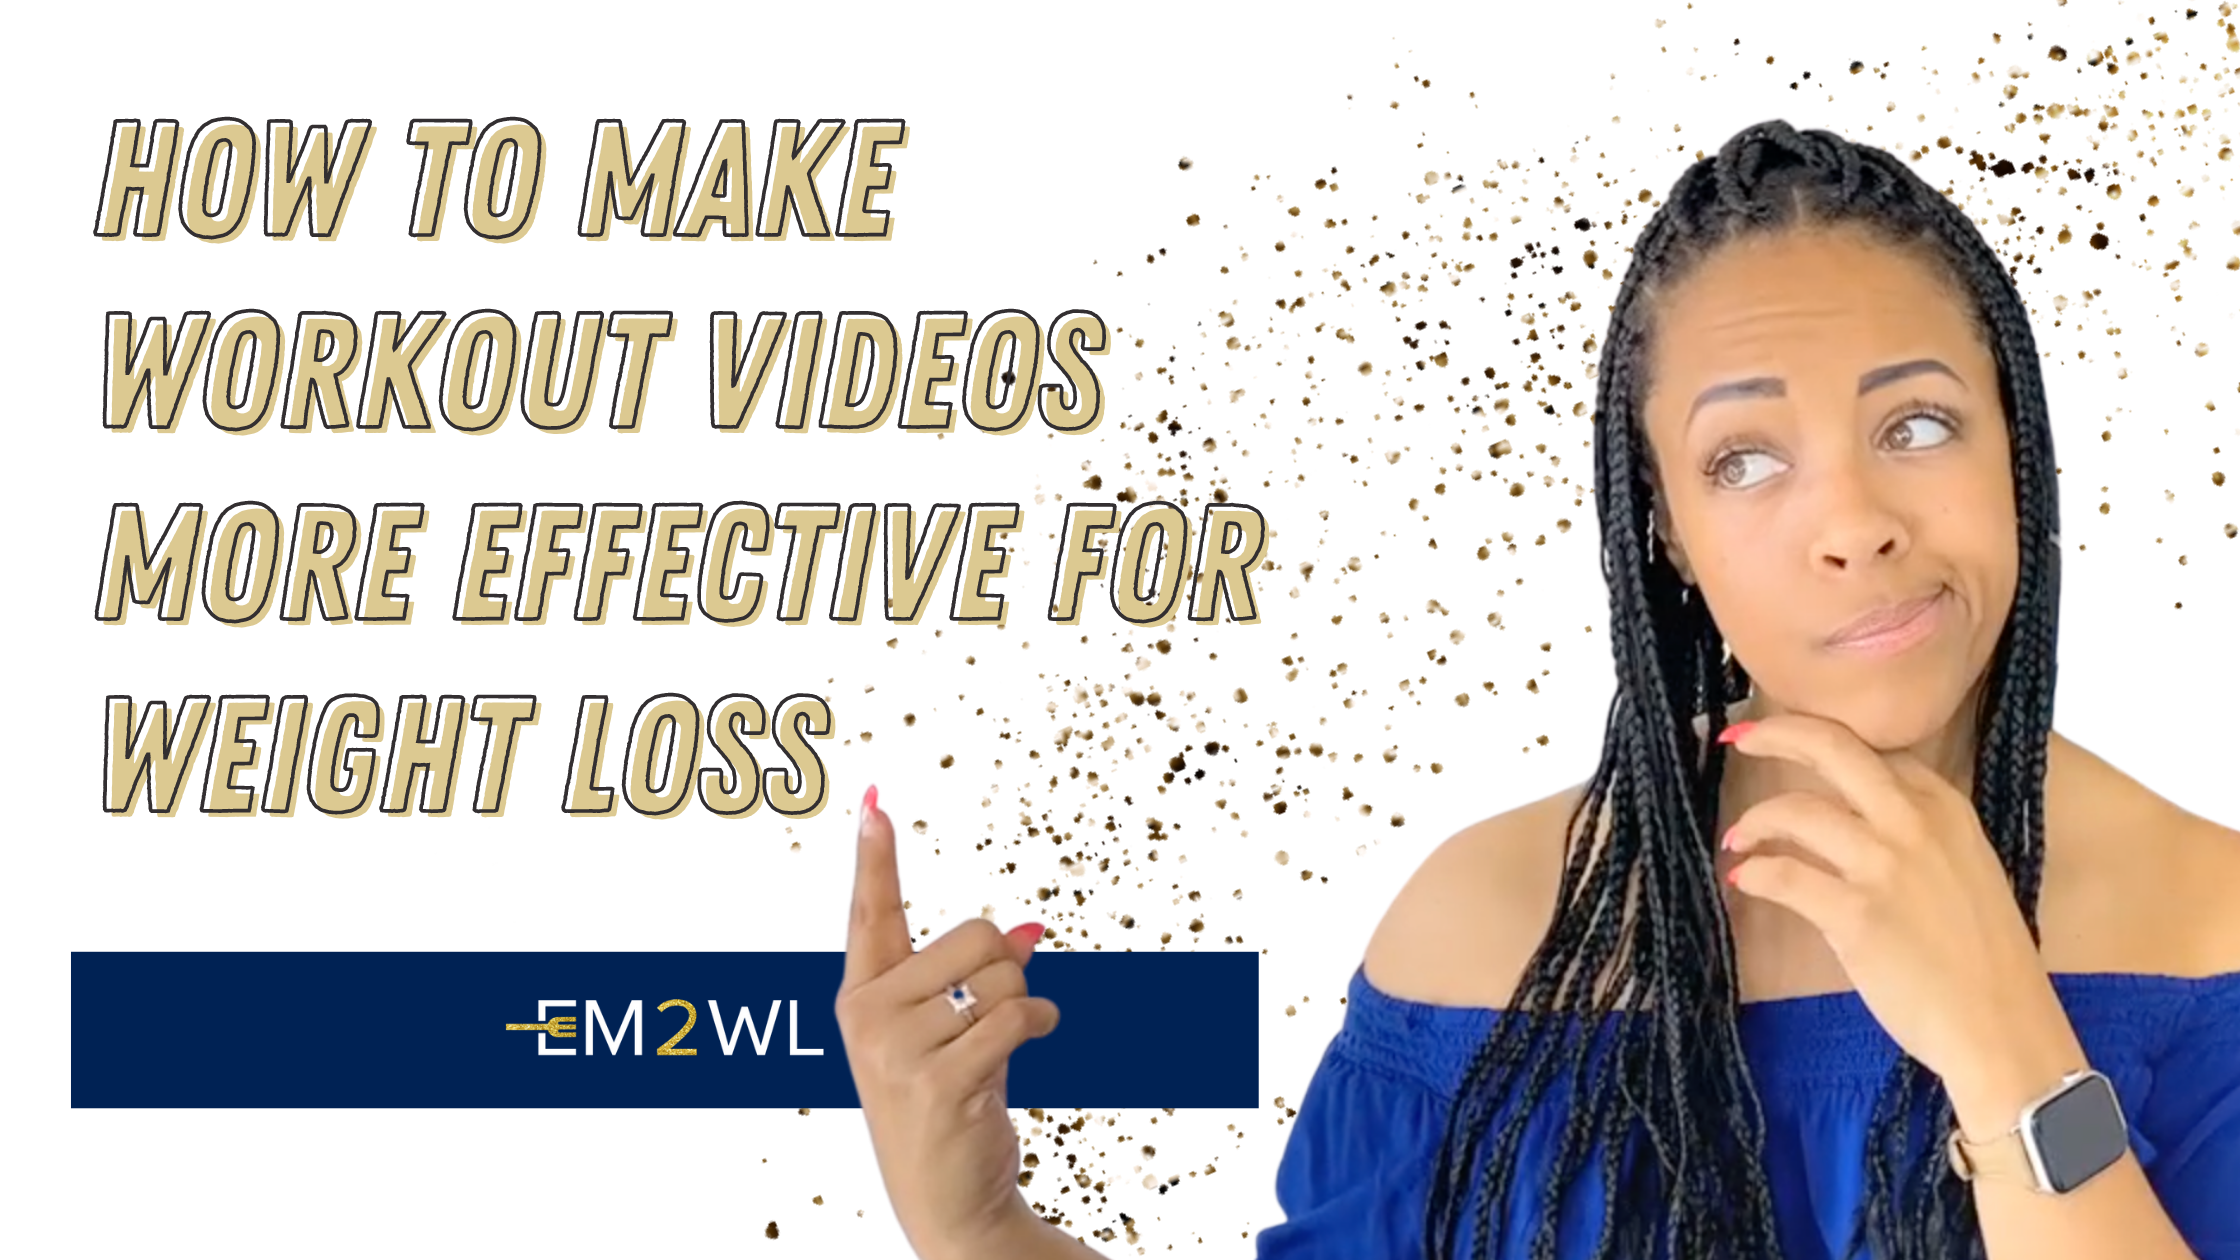 How To Make Workout Videos More Effective For Weight Loss